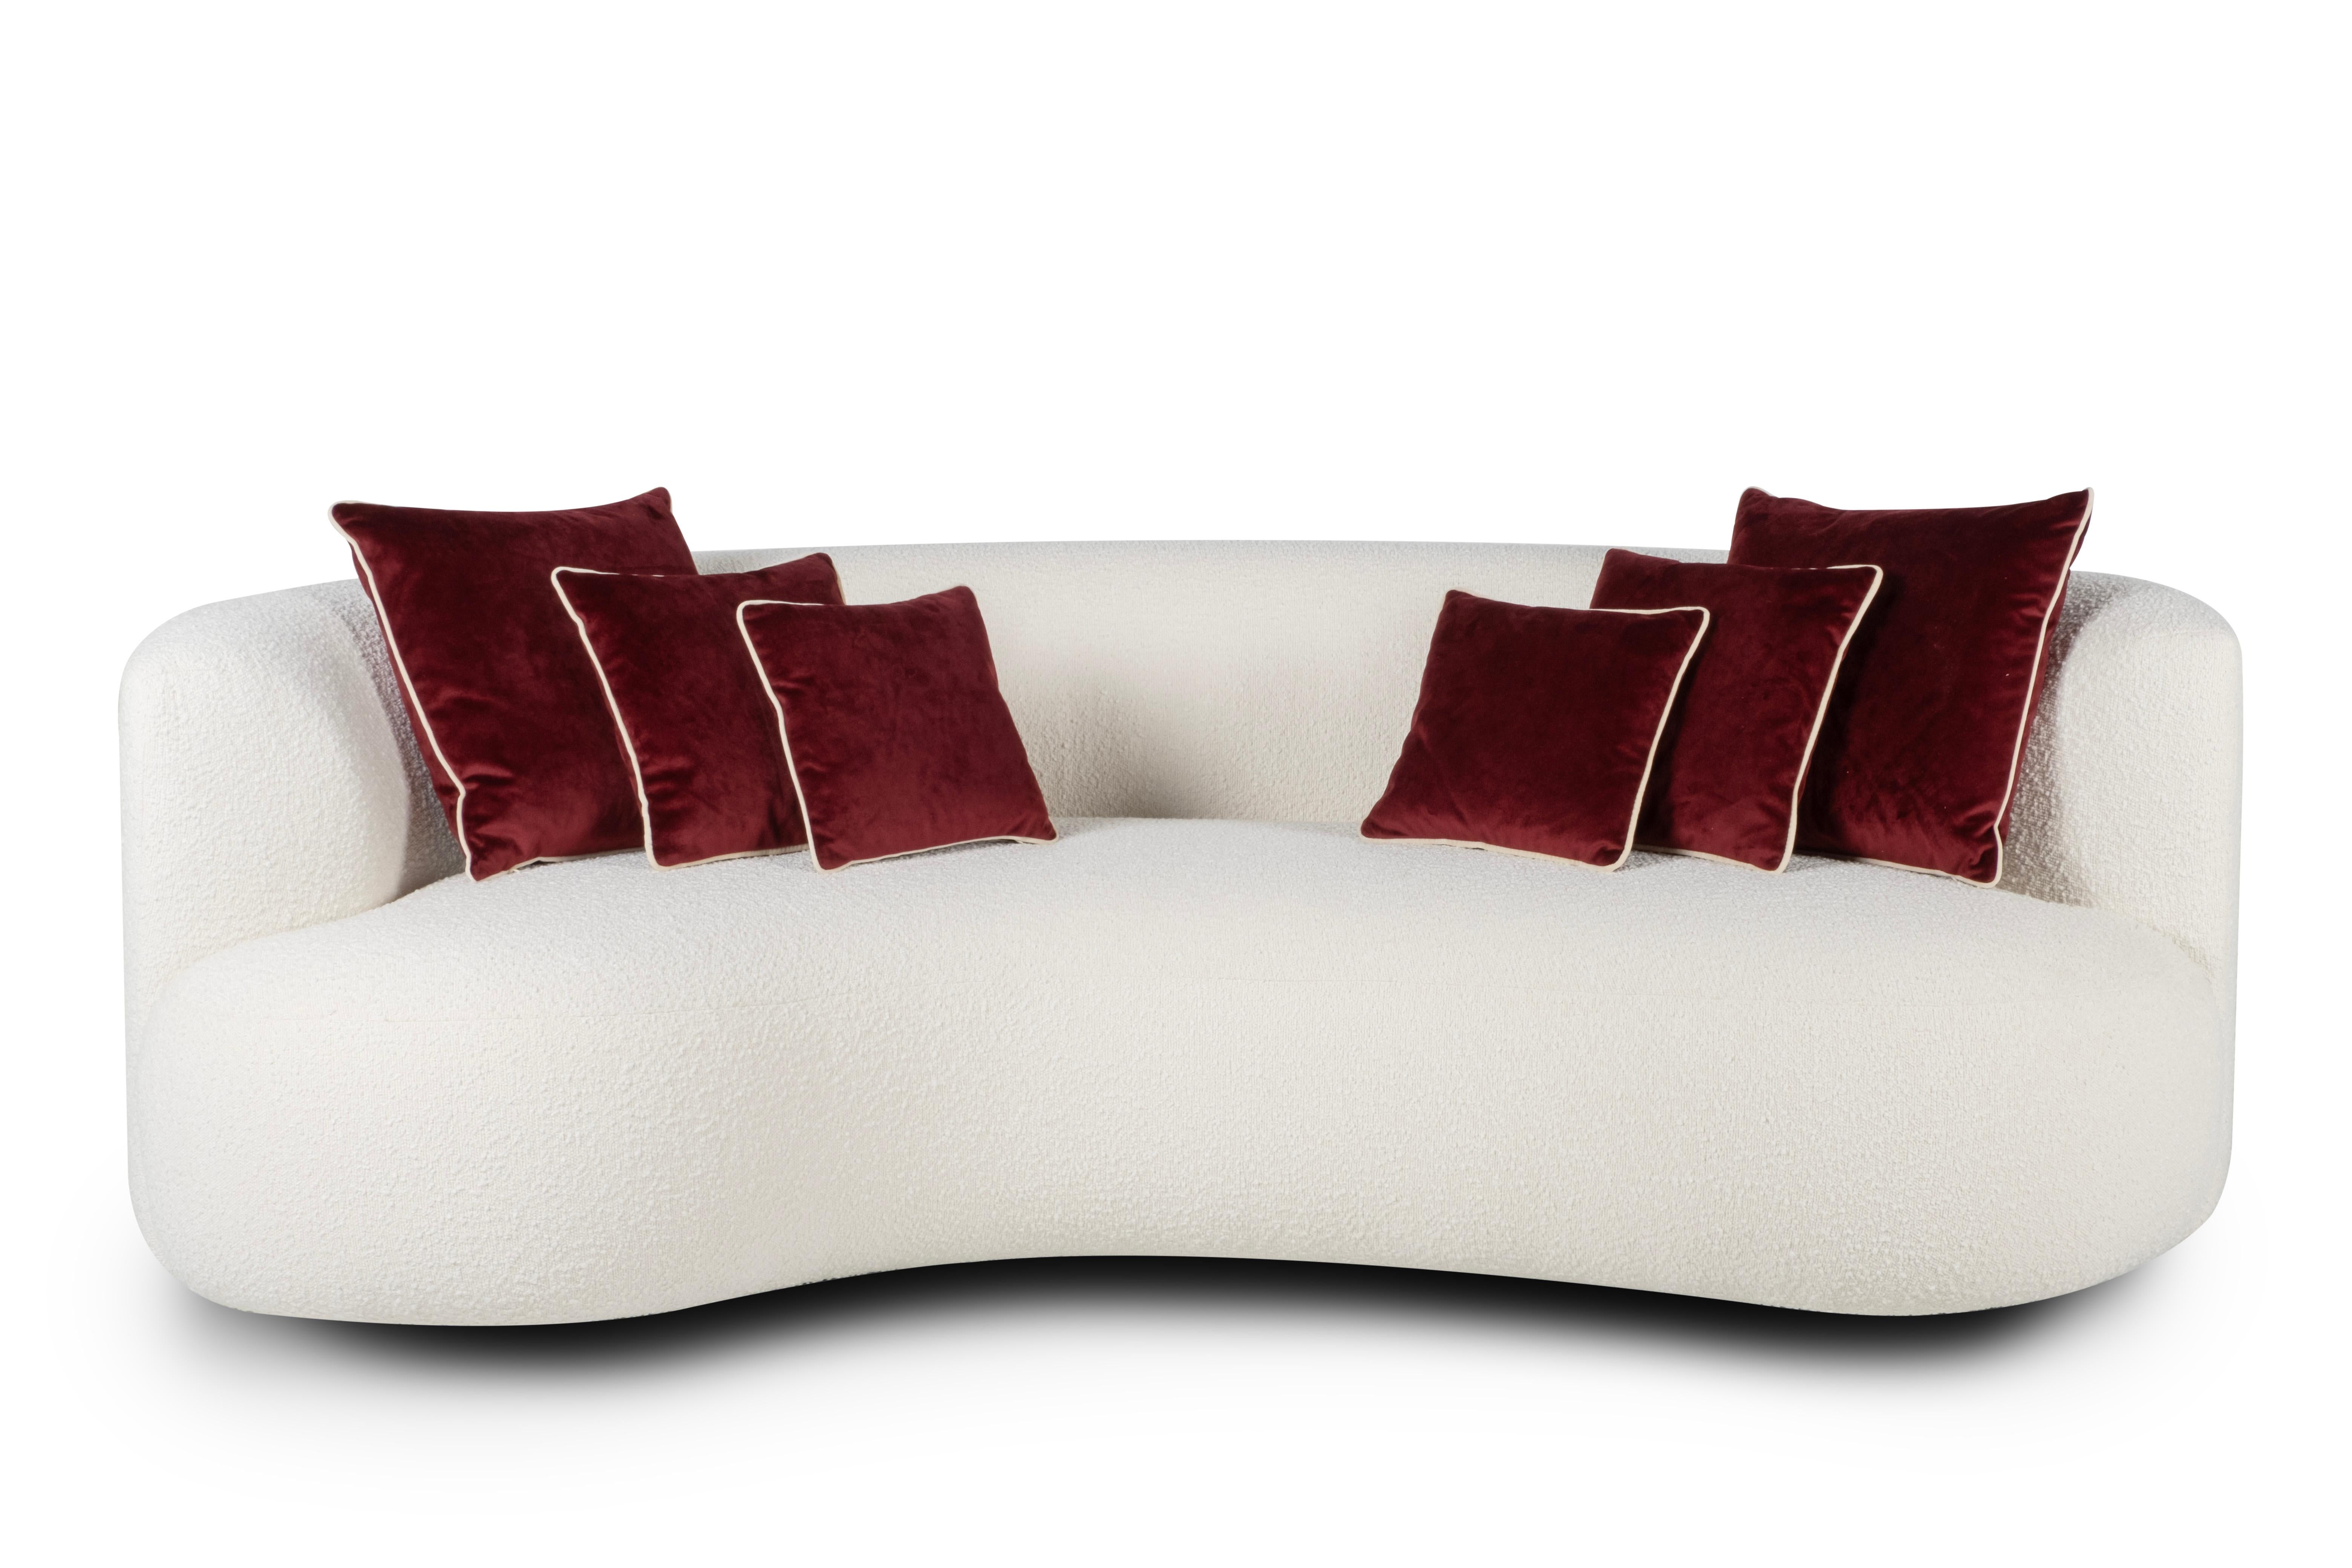 Set/6 Decorative Pillows, Lusitanus Home Collection by Greenapple.

Handmade decorative pillow set with exquisite details.

2x G702921 Square cushion in dark red velvet with cream velvet piping.
Dimensions:
W.45 x H.45 cm / W.17.72 x H.17.72 in

2x